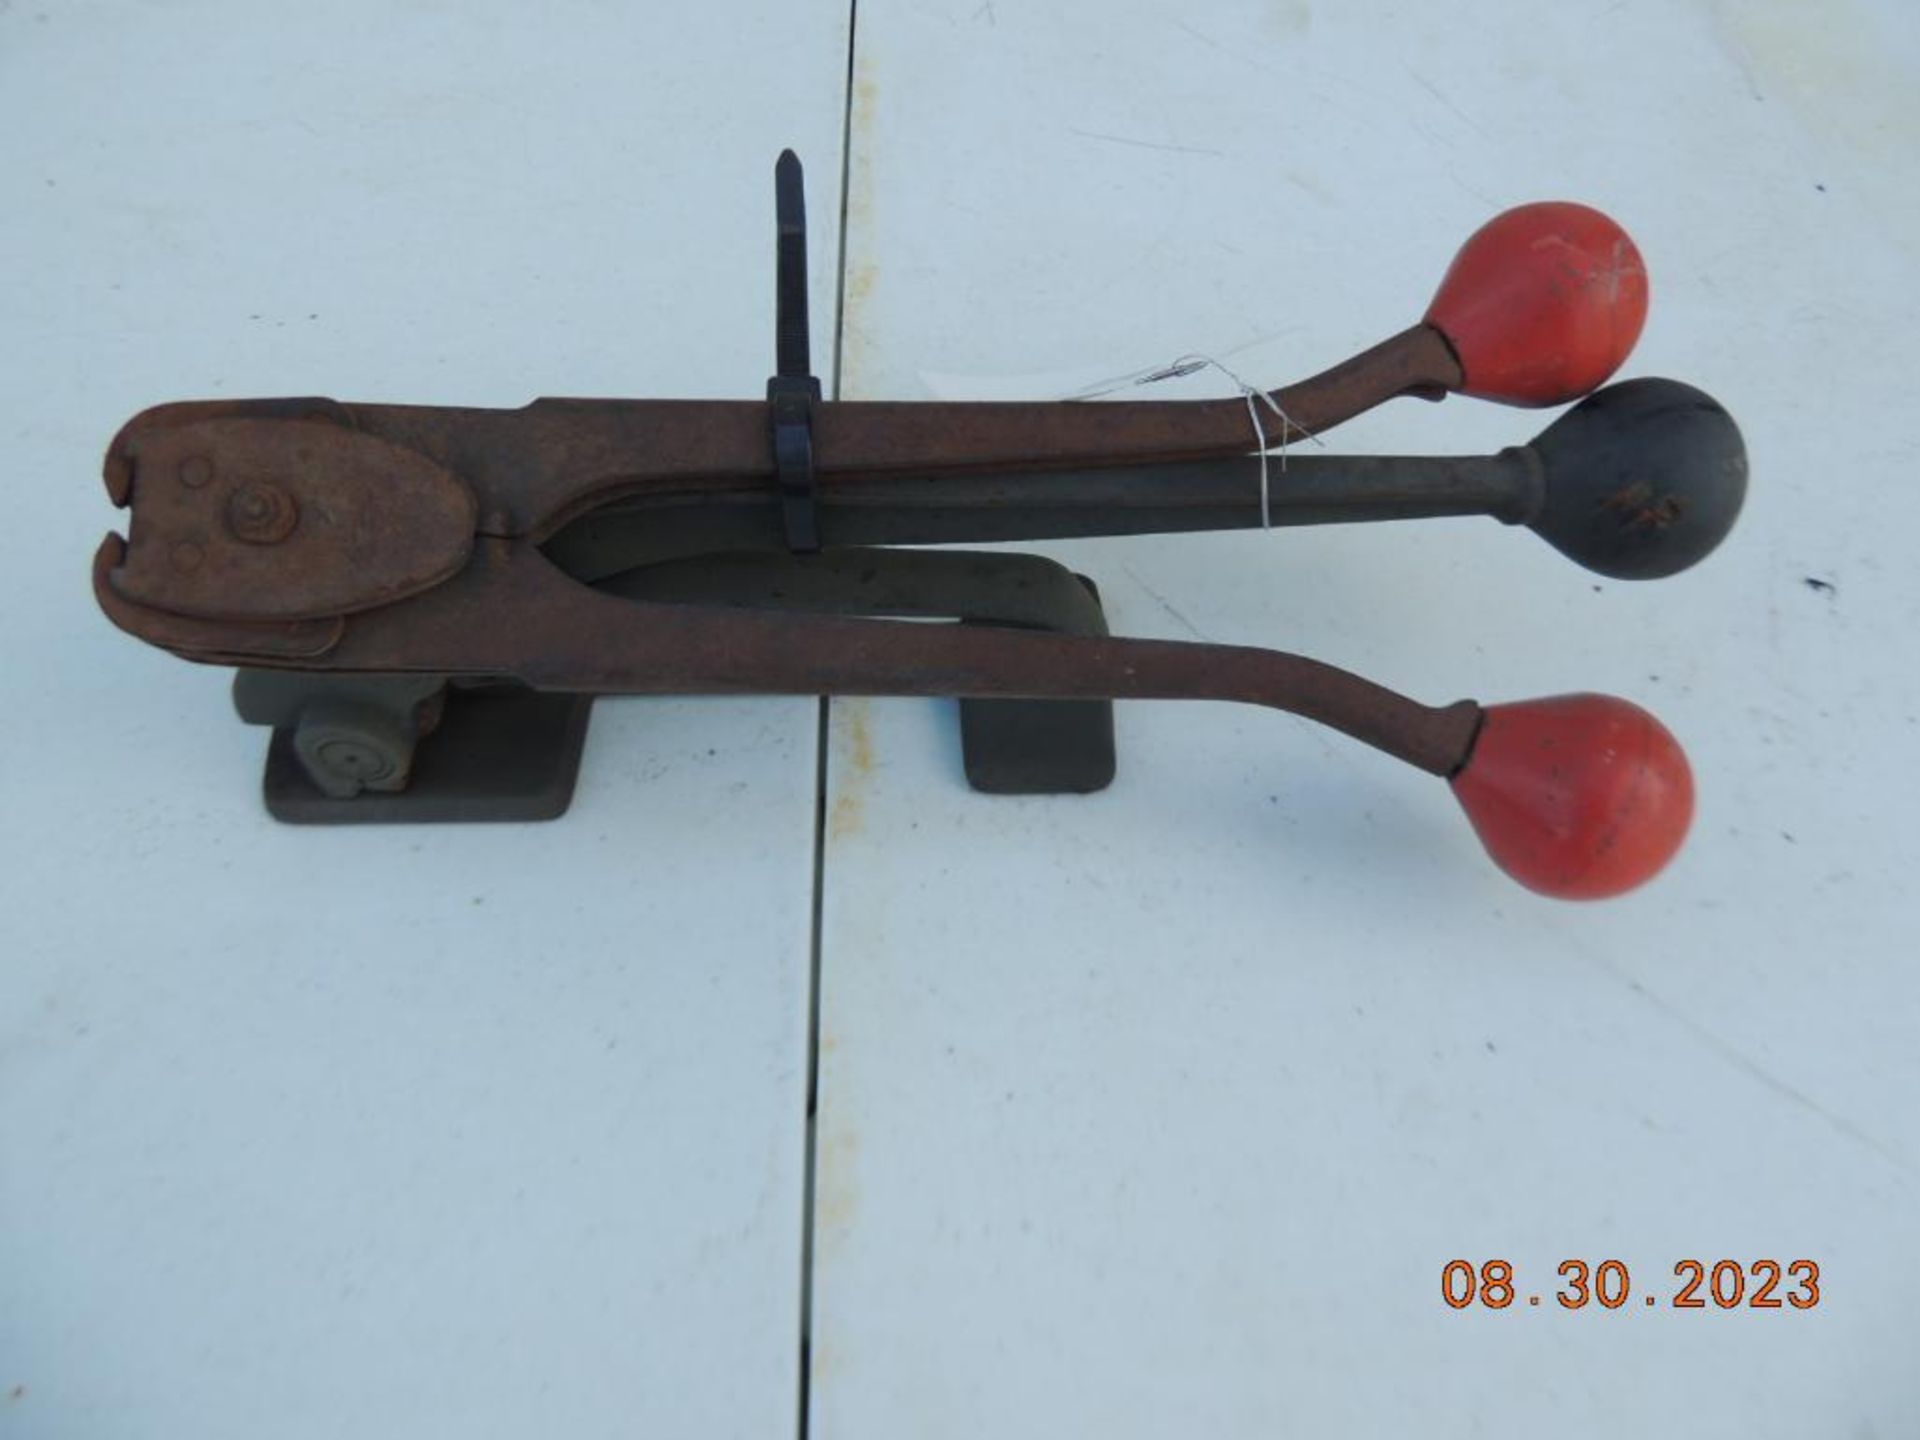 Steel Strapping Tools - Image 2 of 3